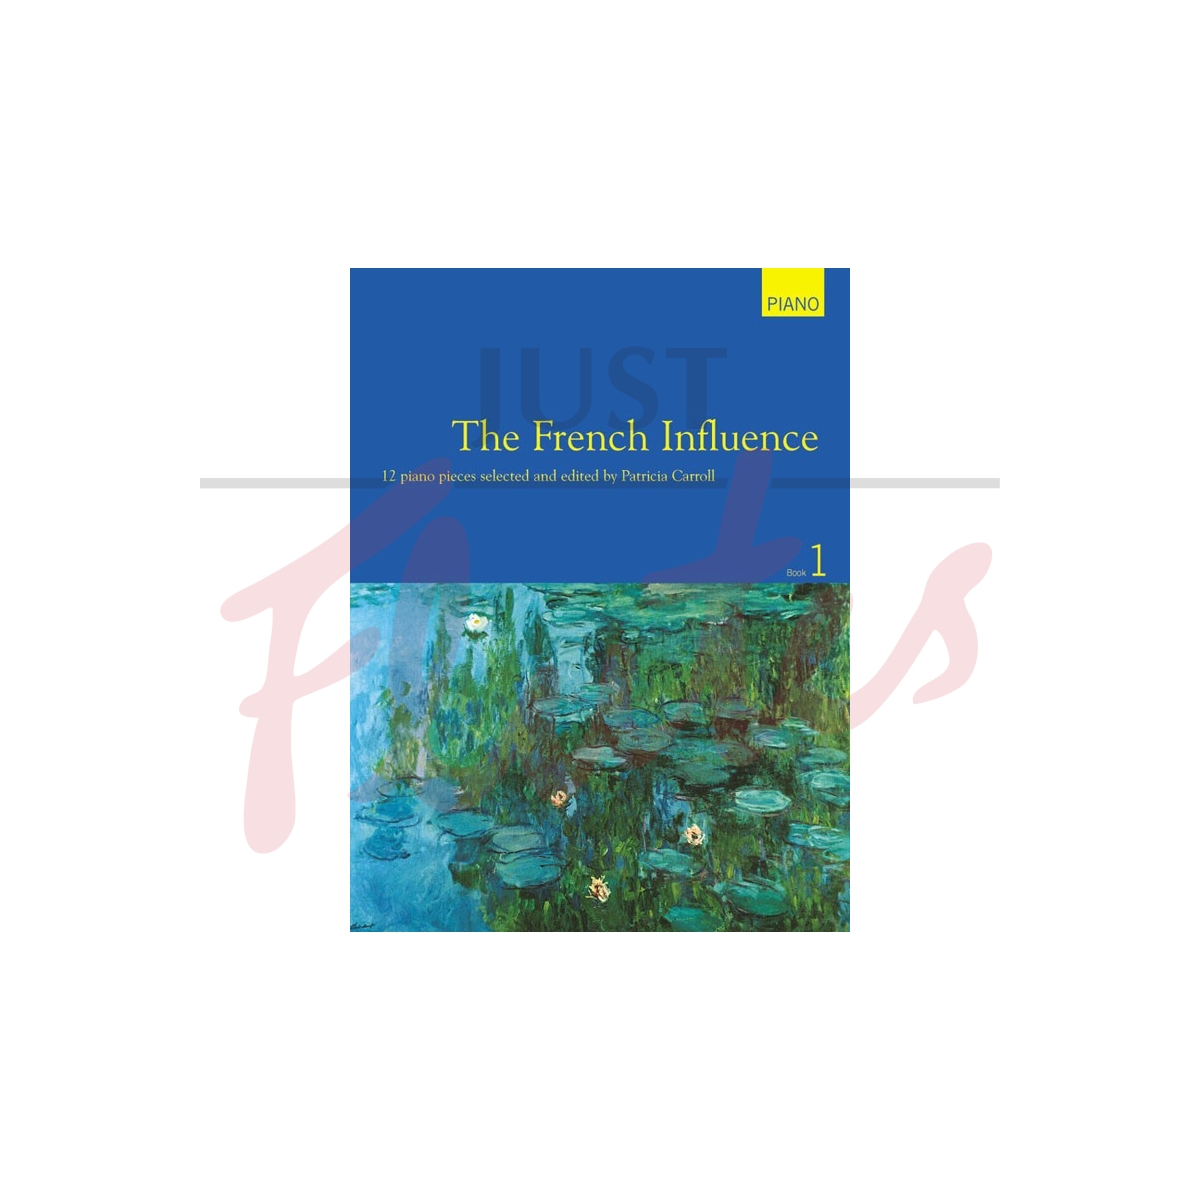 The French Influence [Piano]